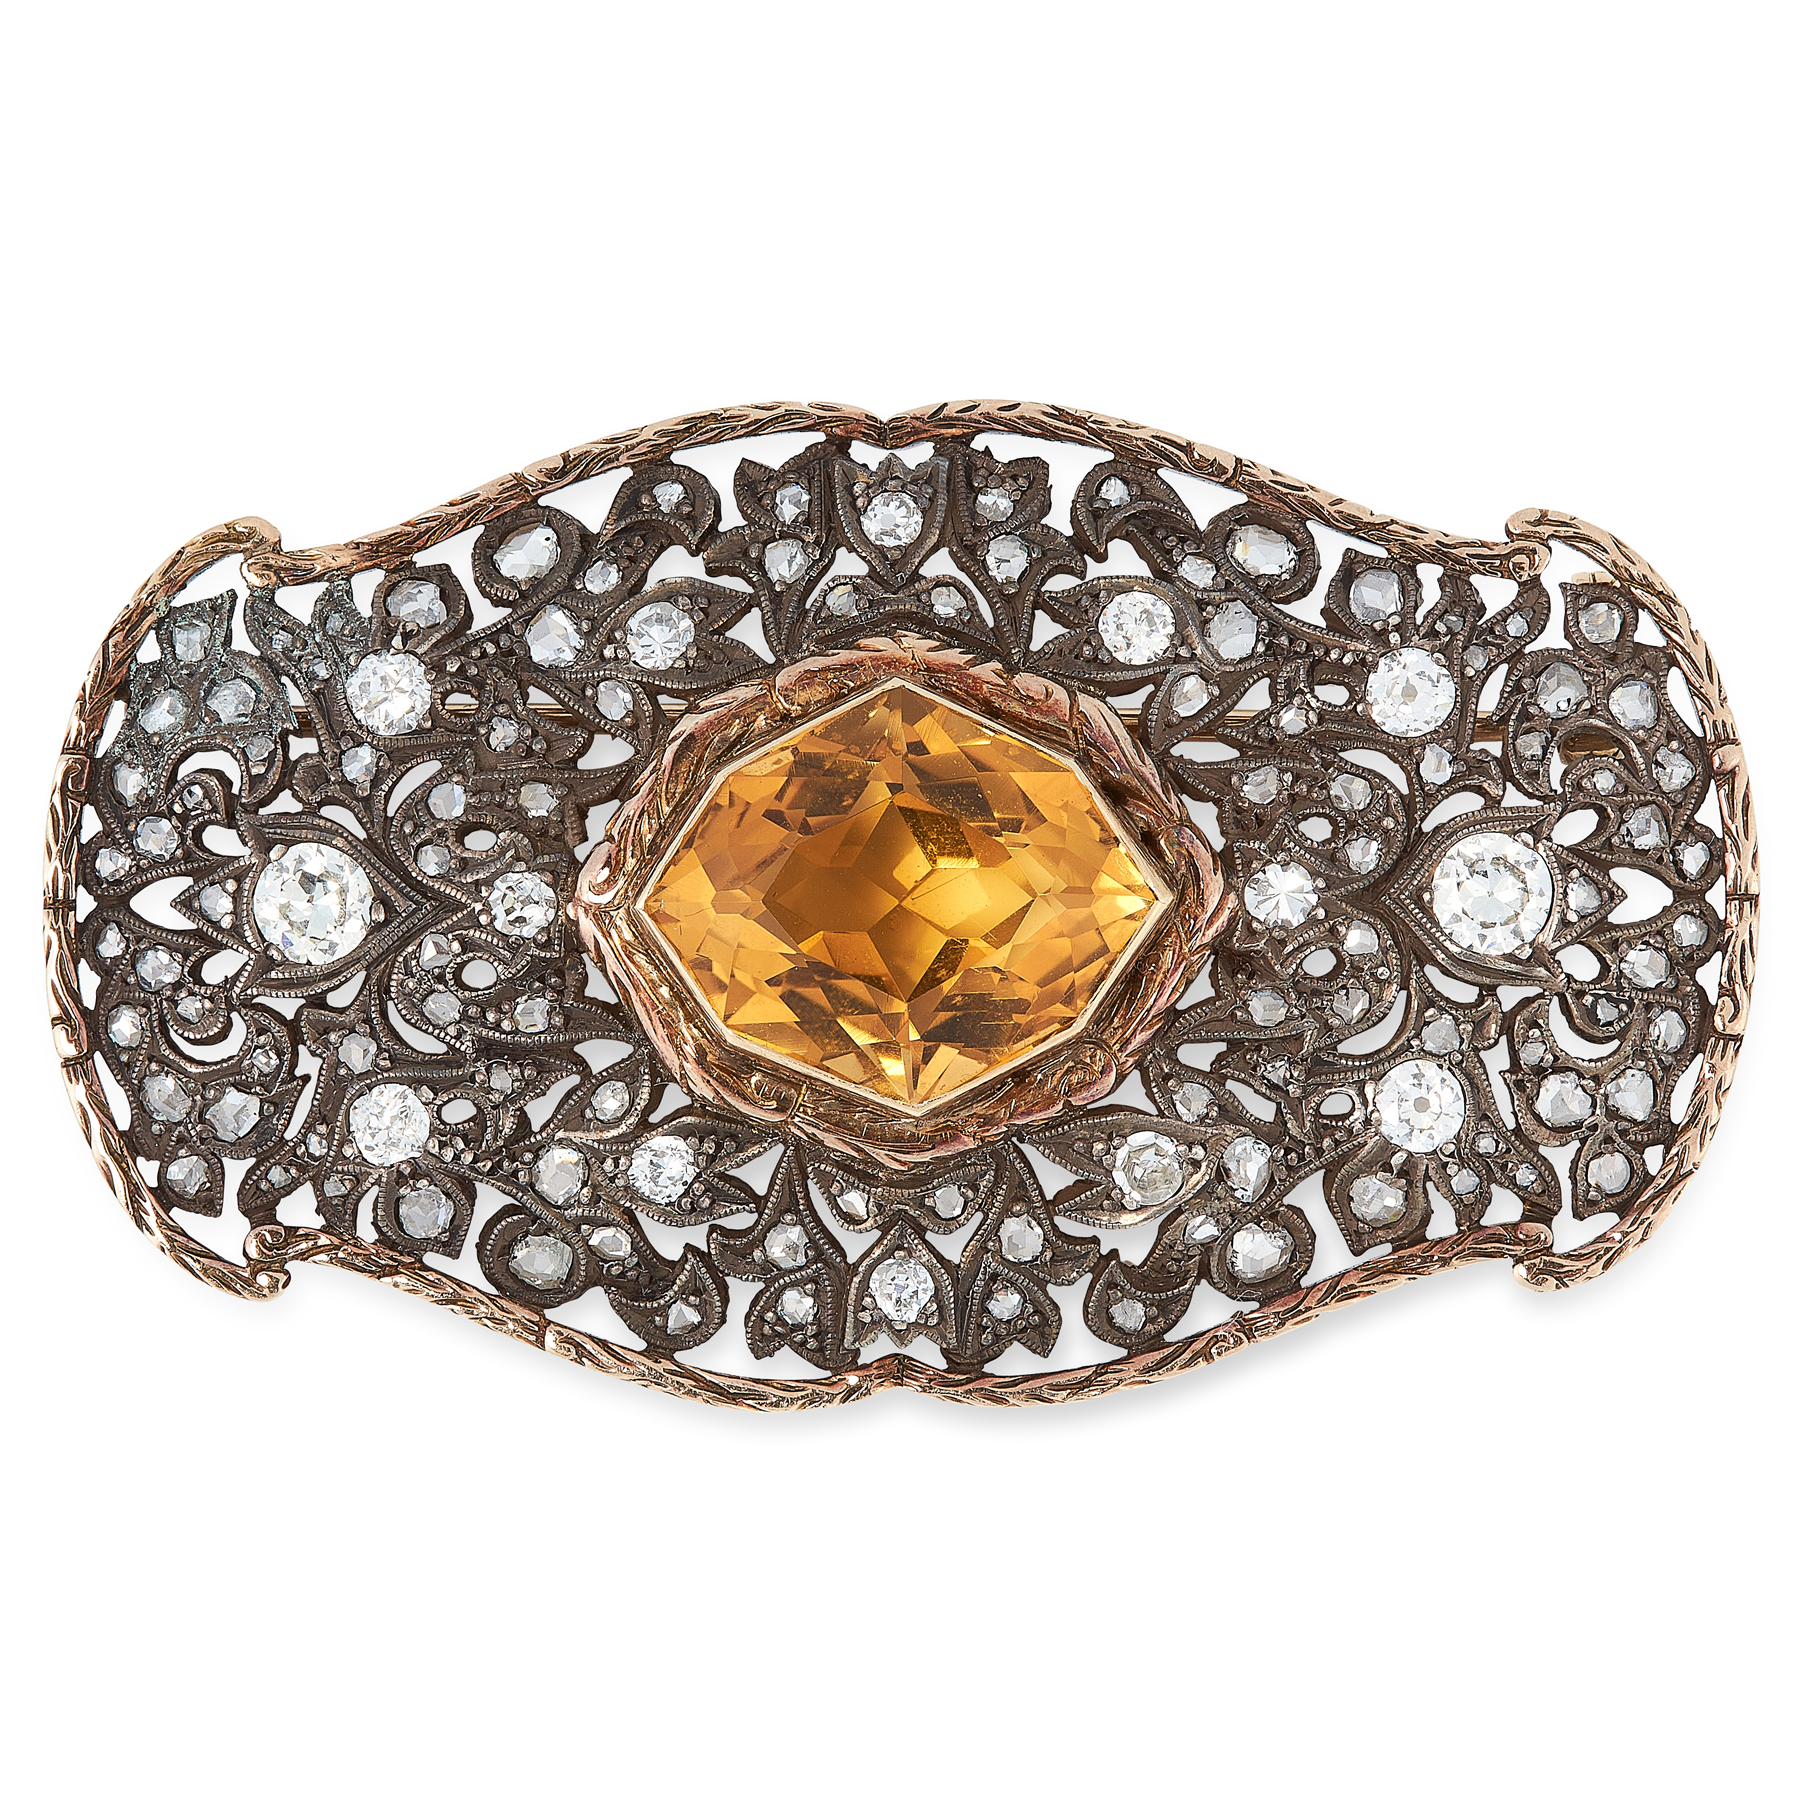 AN ANTIQUE CITRINE AND DIAMOND BROOCH in yellow gold and silver, set with a fancy cut citrine within